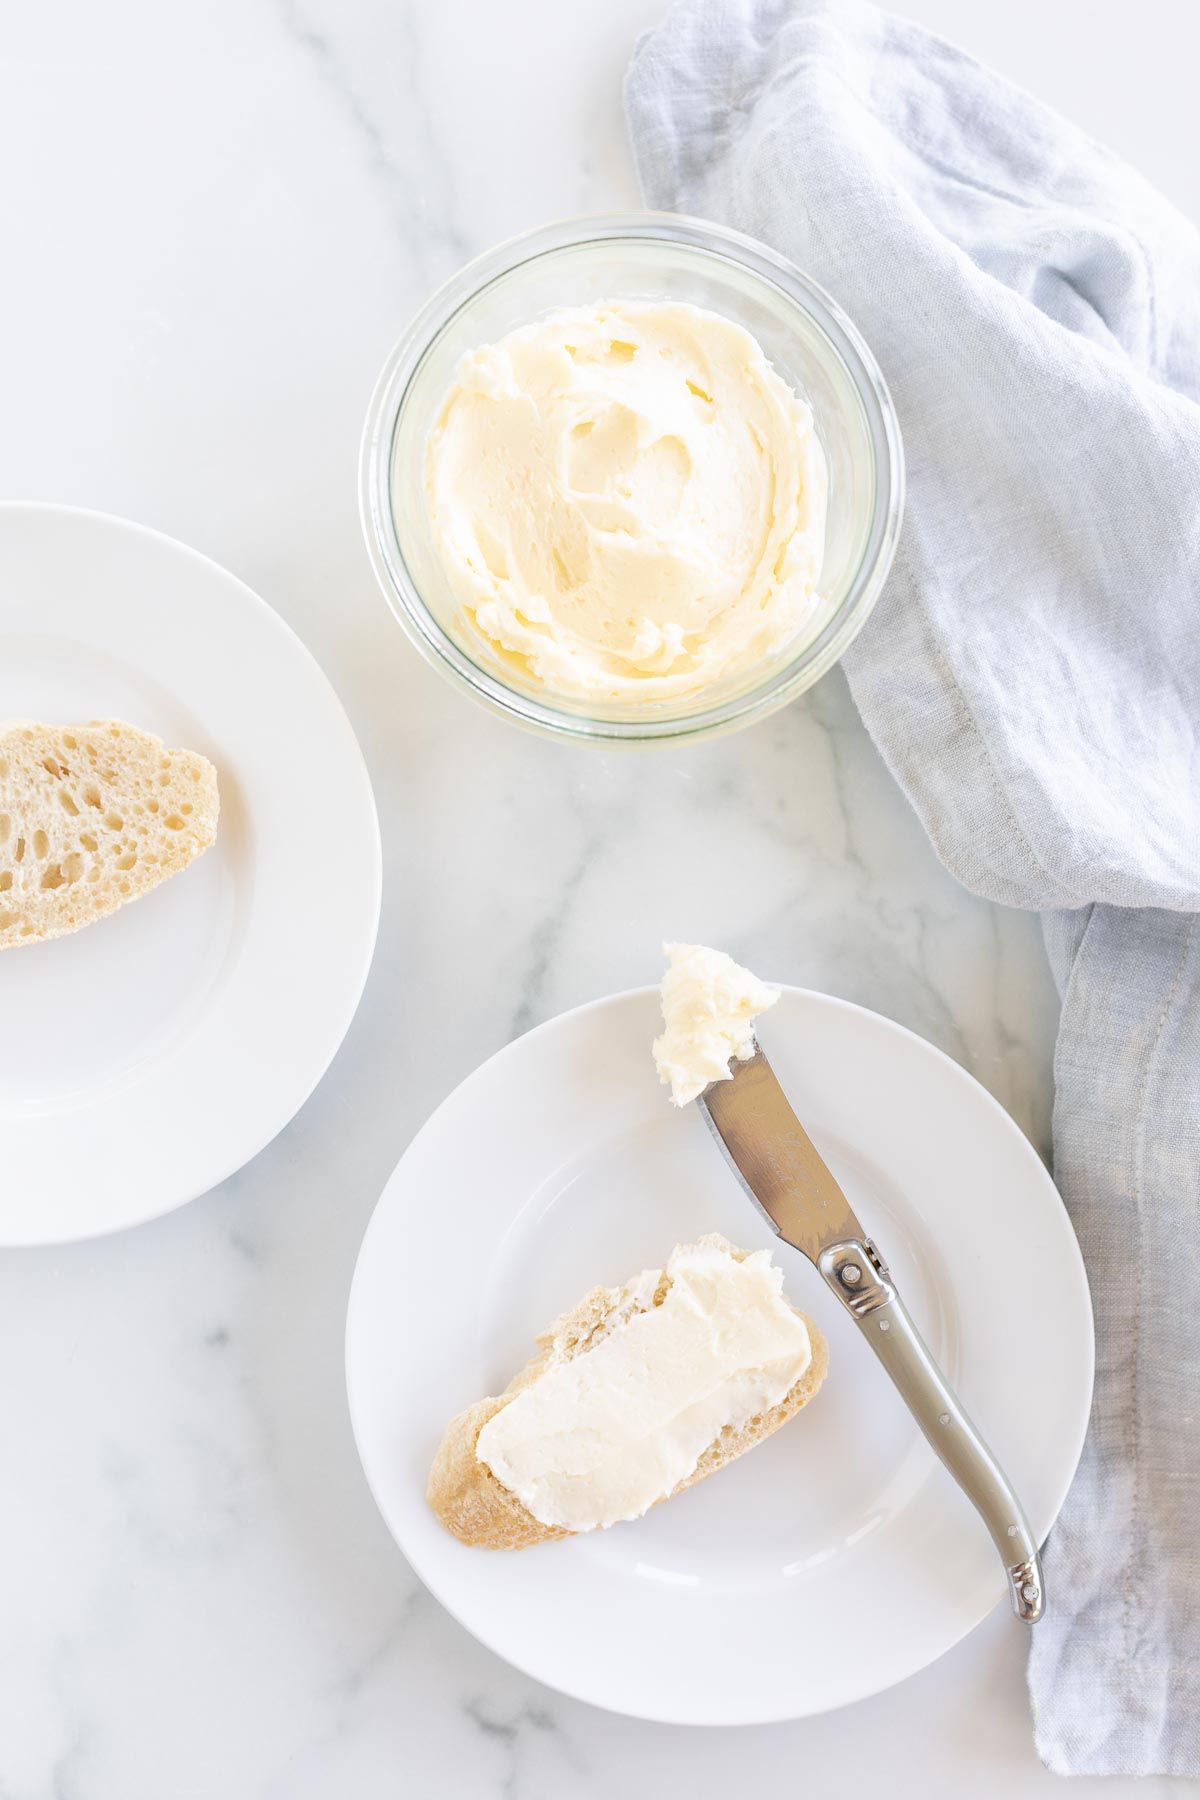 A small glass bowl of homemade butter, with a plate of sliced bread spread with butter nearby